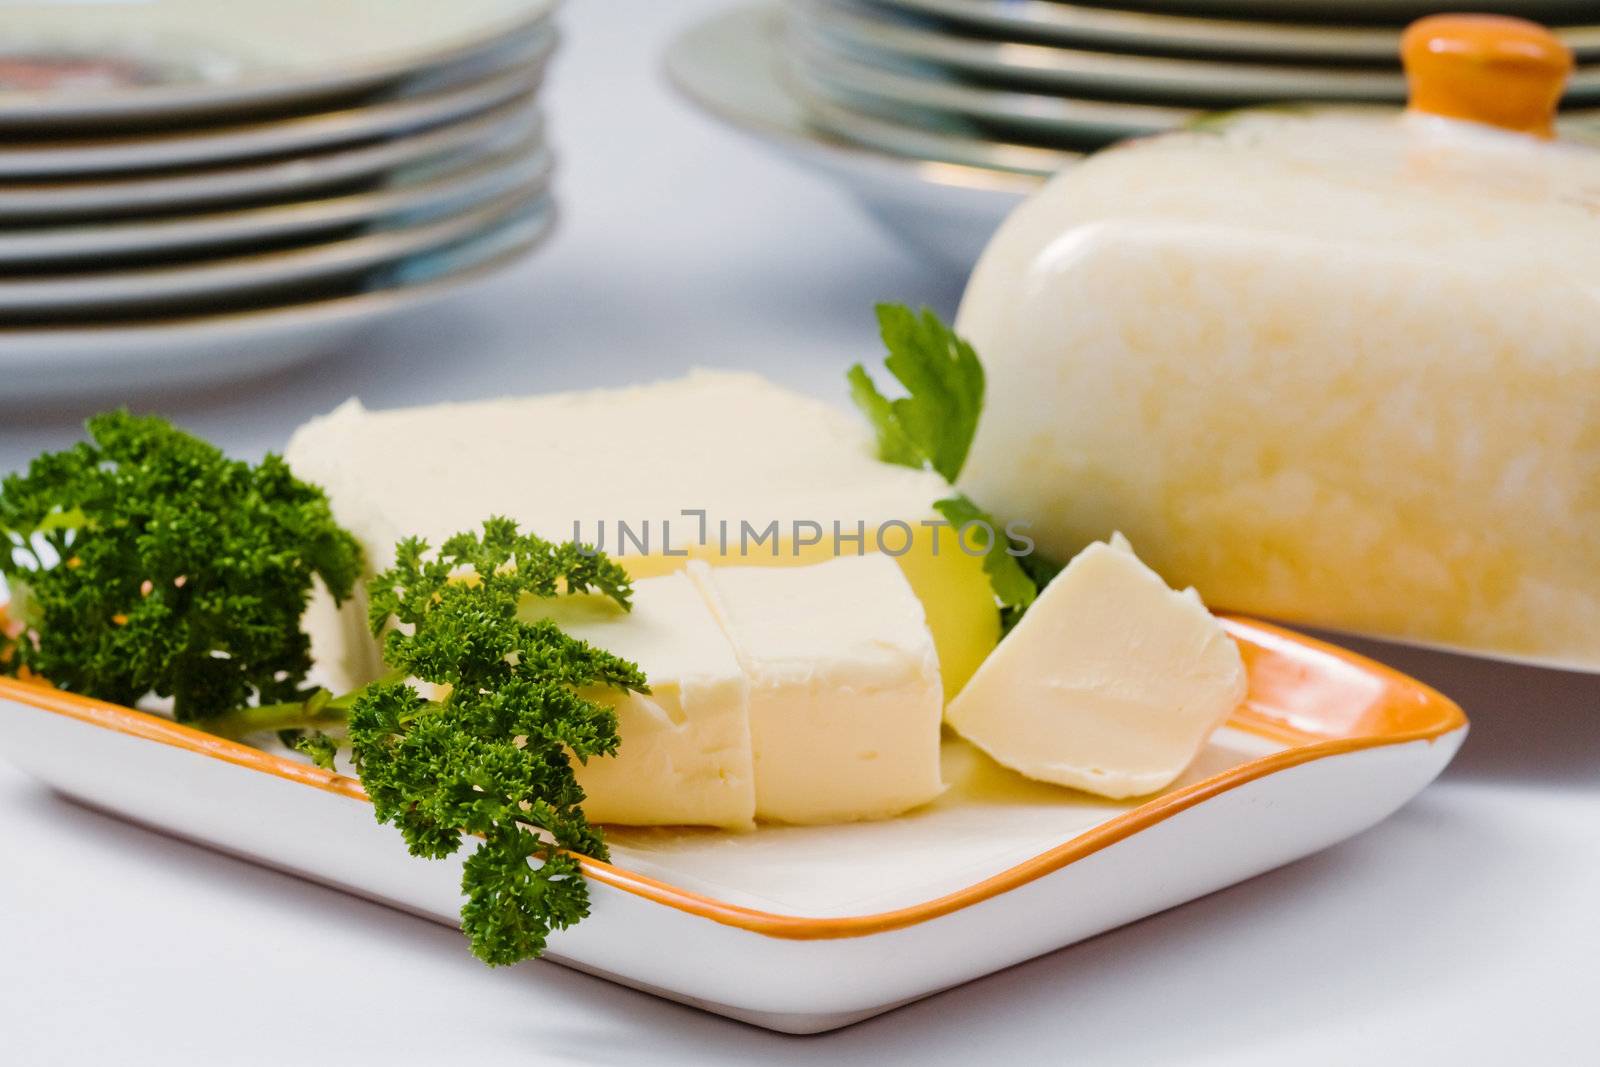 Stock photo: food theme: an image of fresh butter on a plate